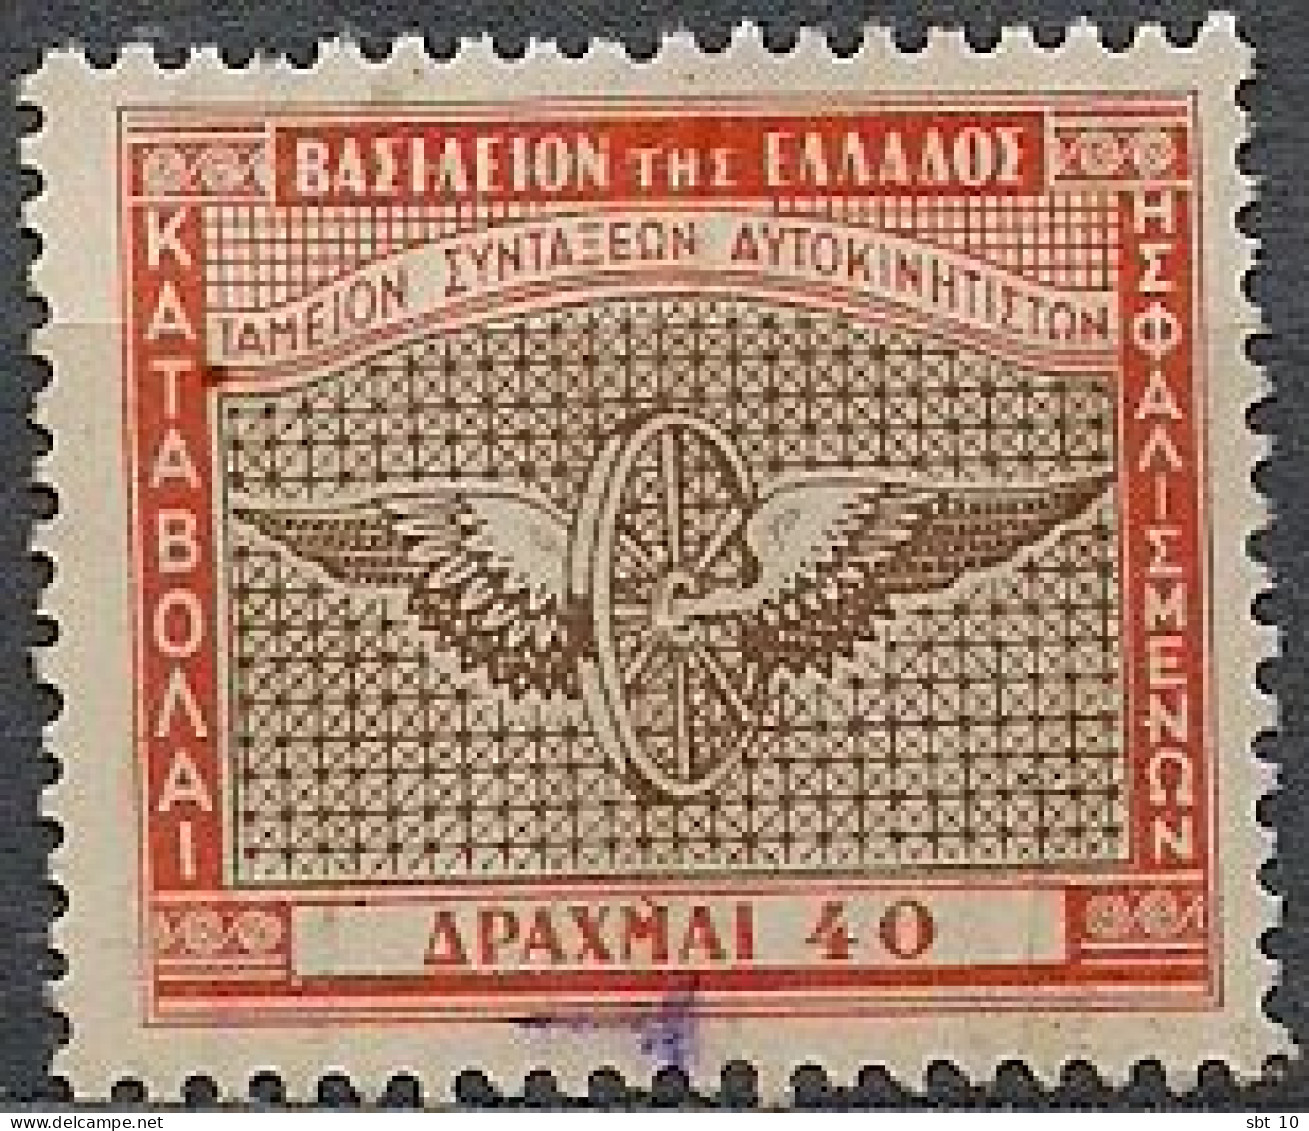 Greece - Pension Fund For Motorists 40dr. Revenue Stamps - Used - Revenue Stamps